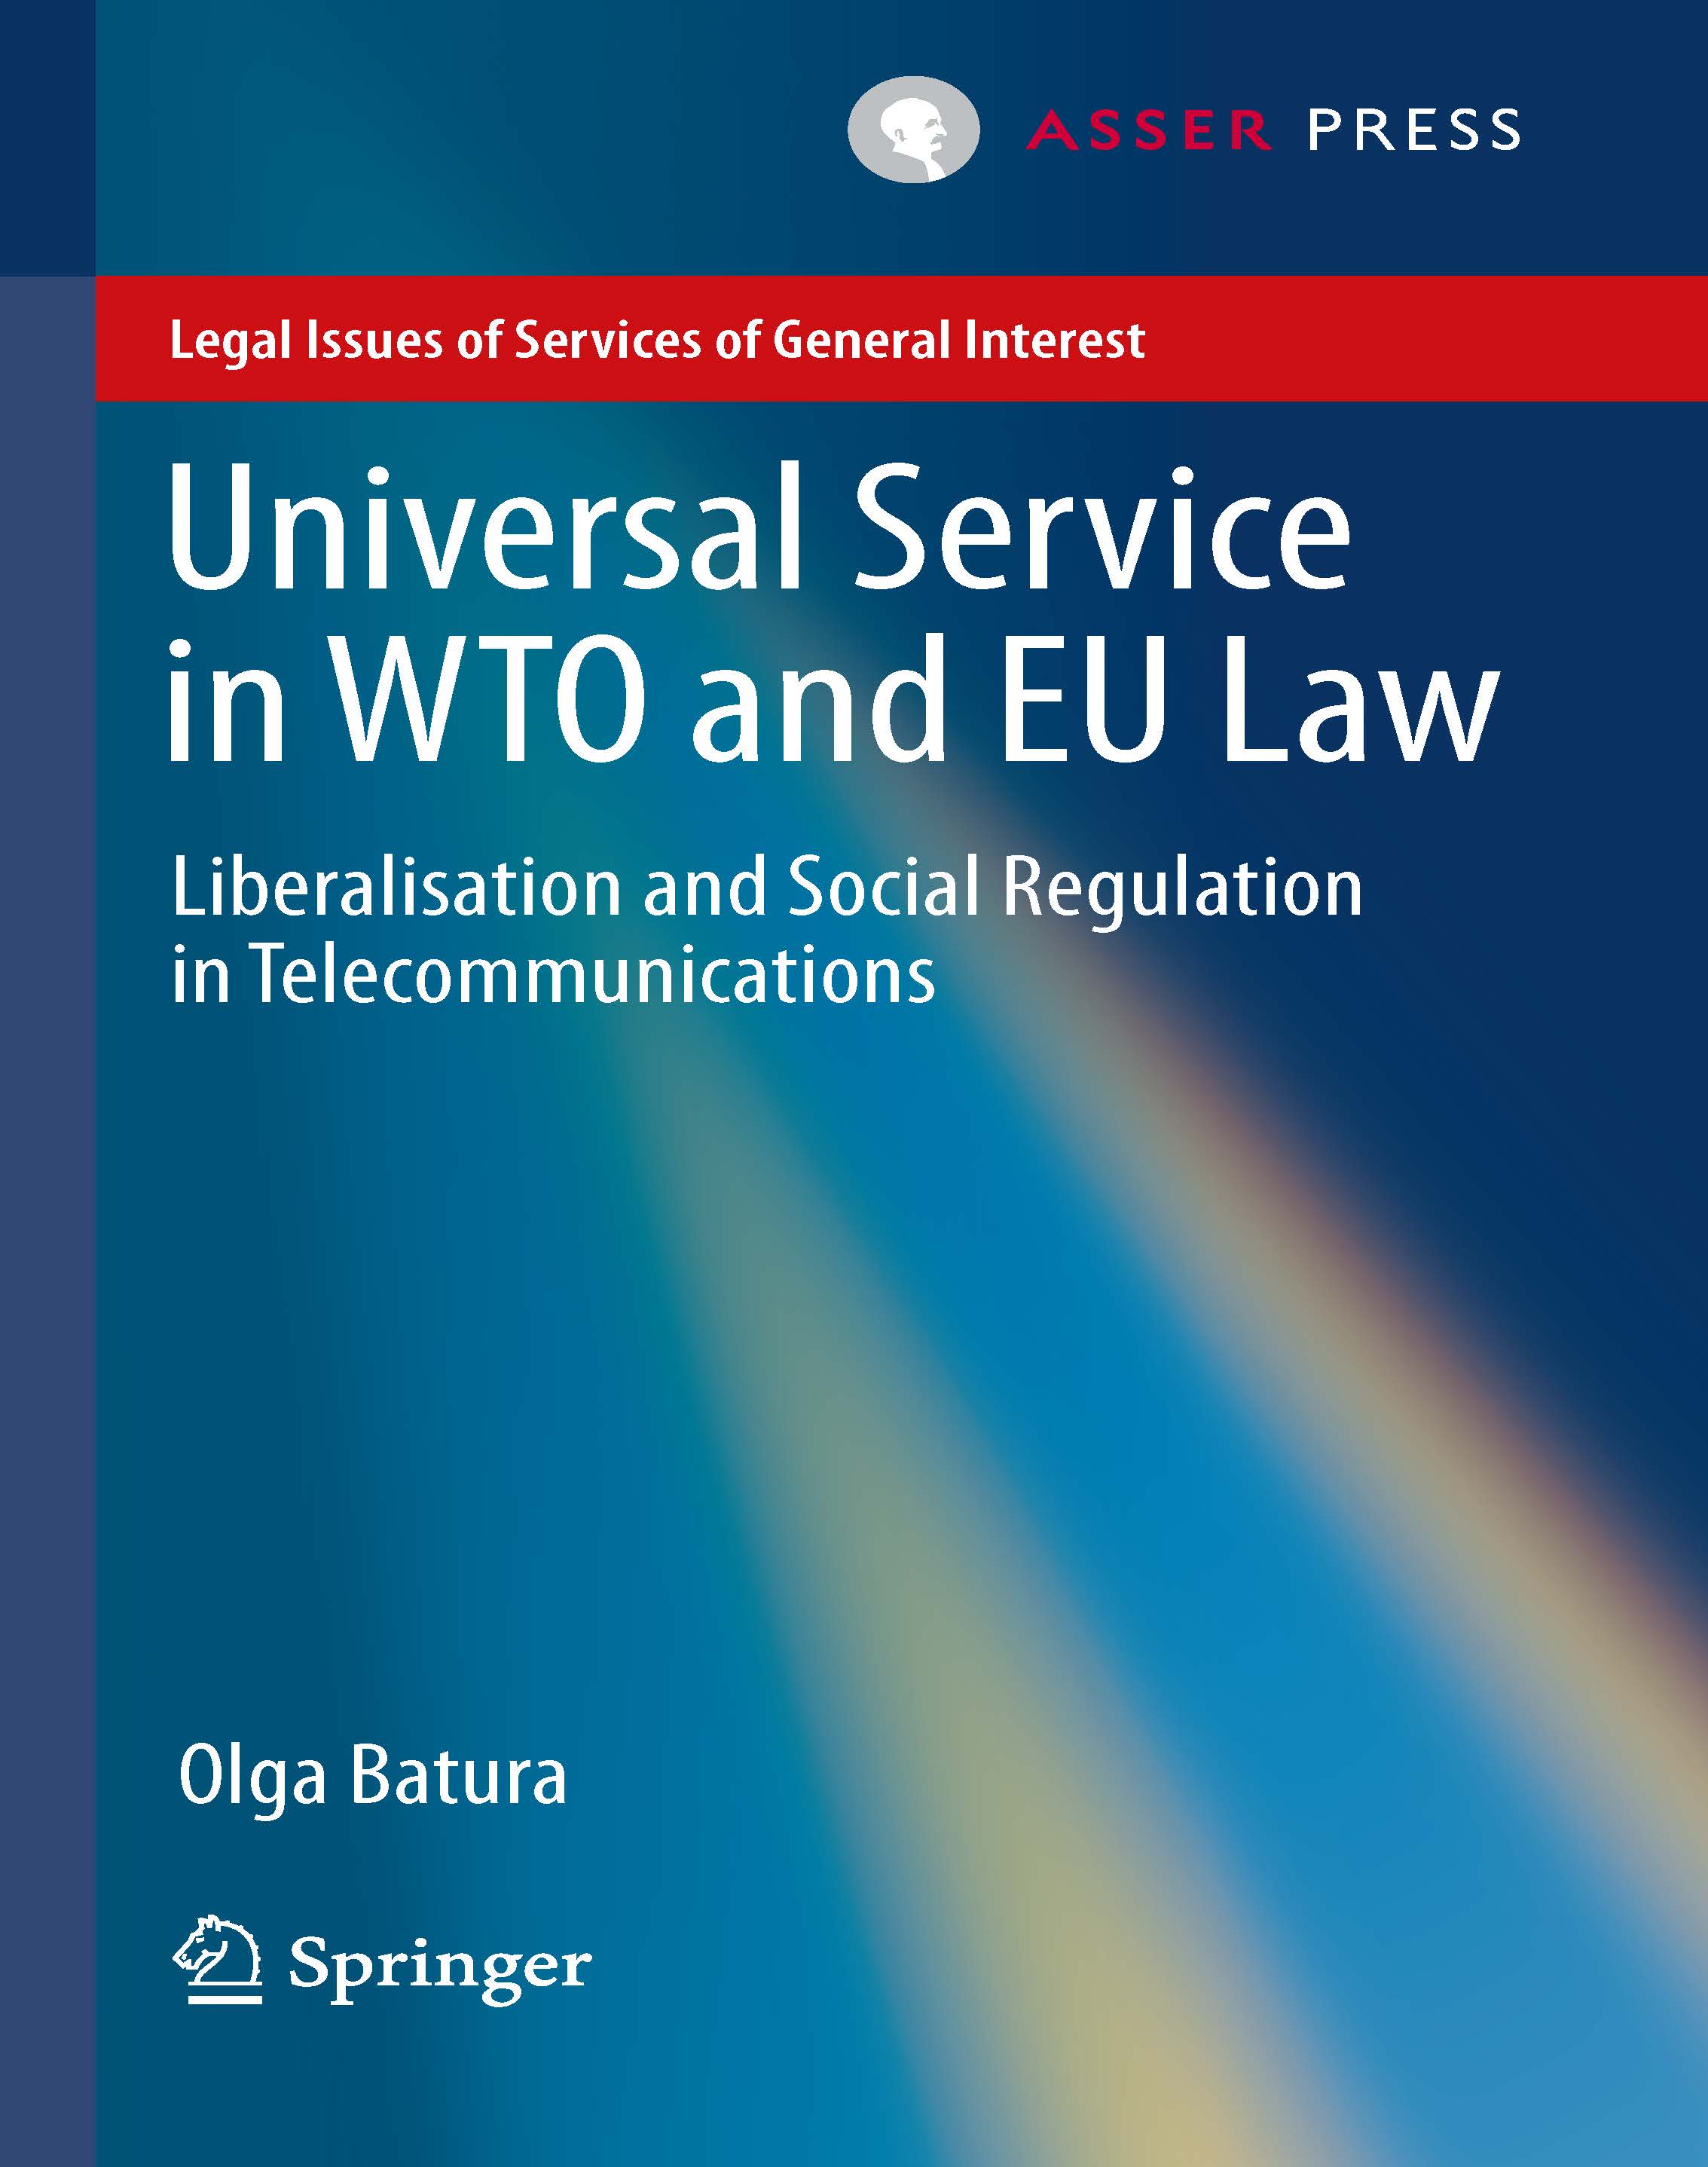 Universal Service in WTO and EU Law: Liberalisation and Social Regulation in Telecommunications